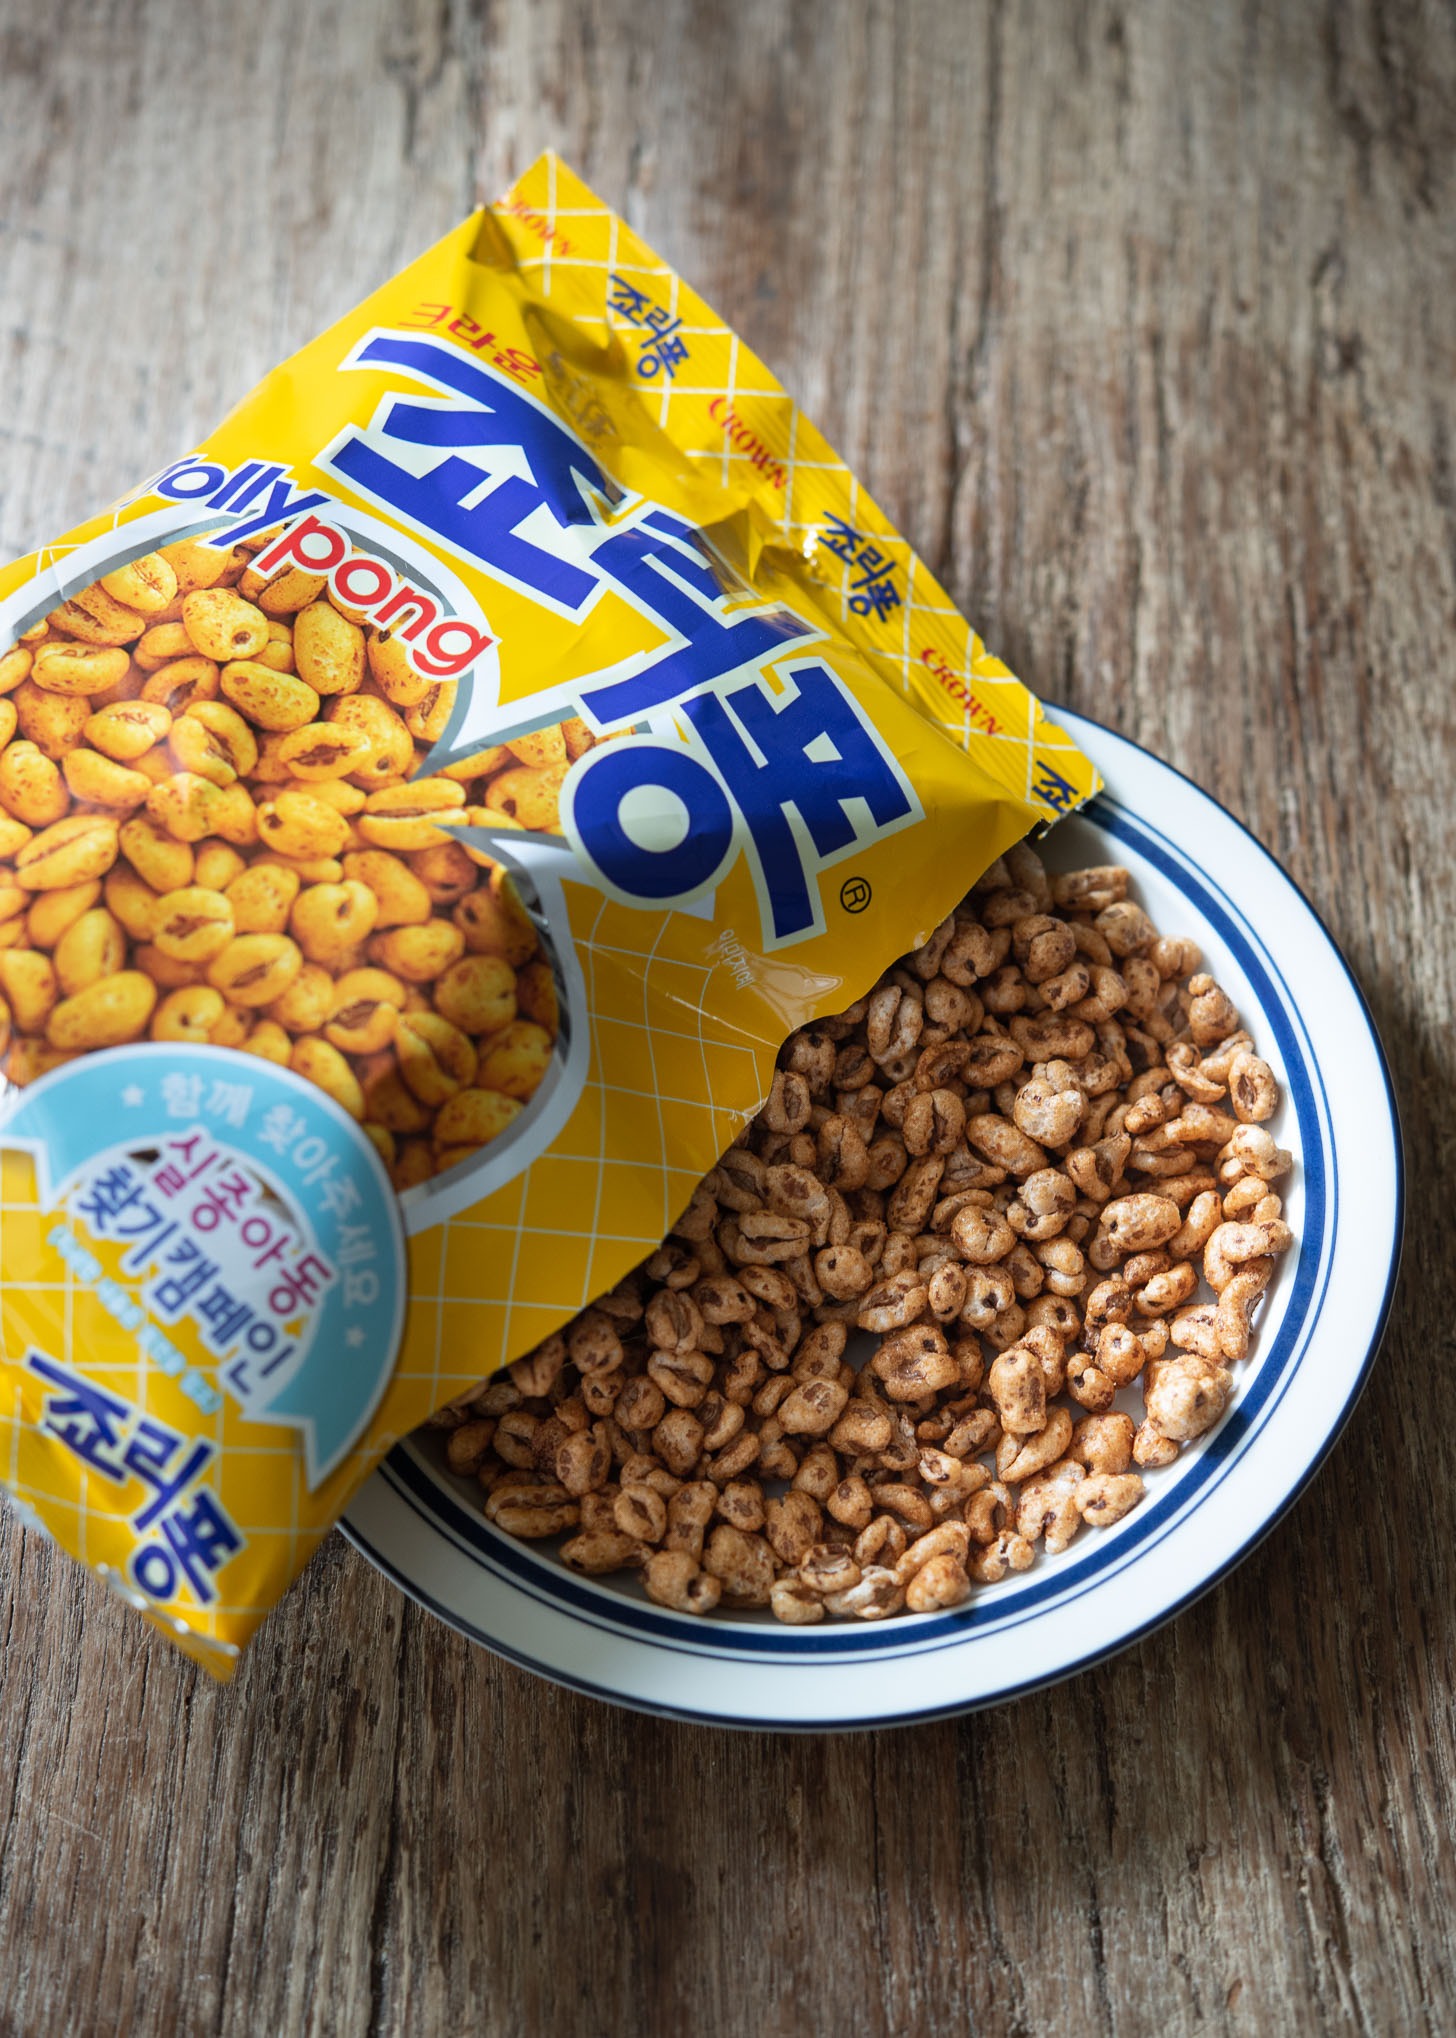 An open bag of Jolly Pong, Korean puffed wheat cereal.